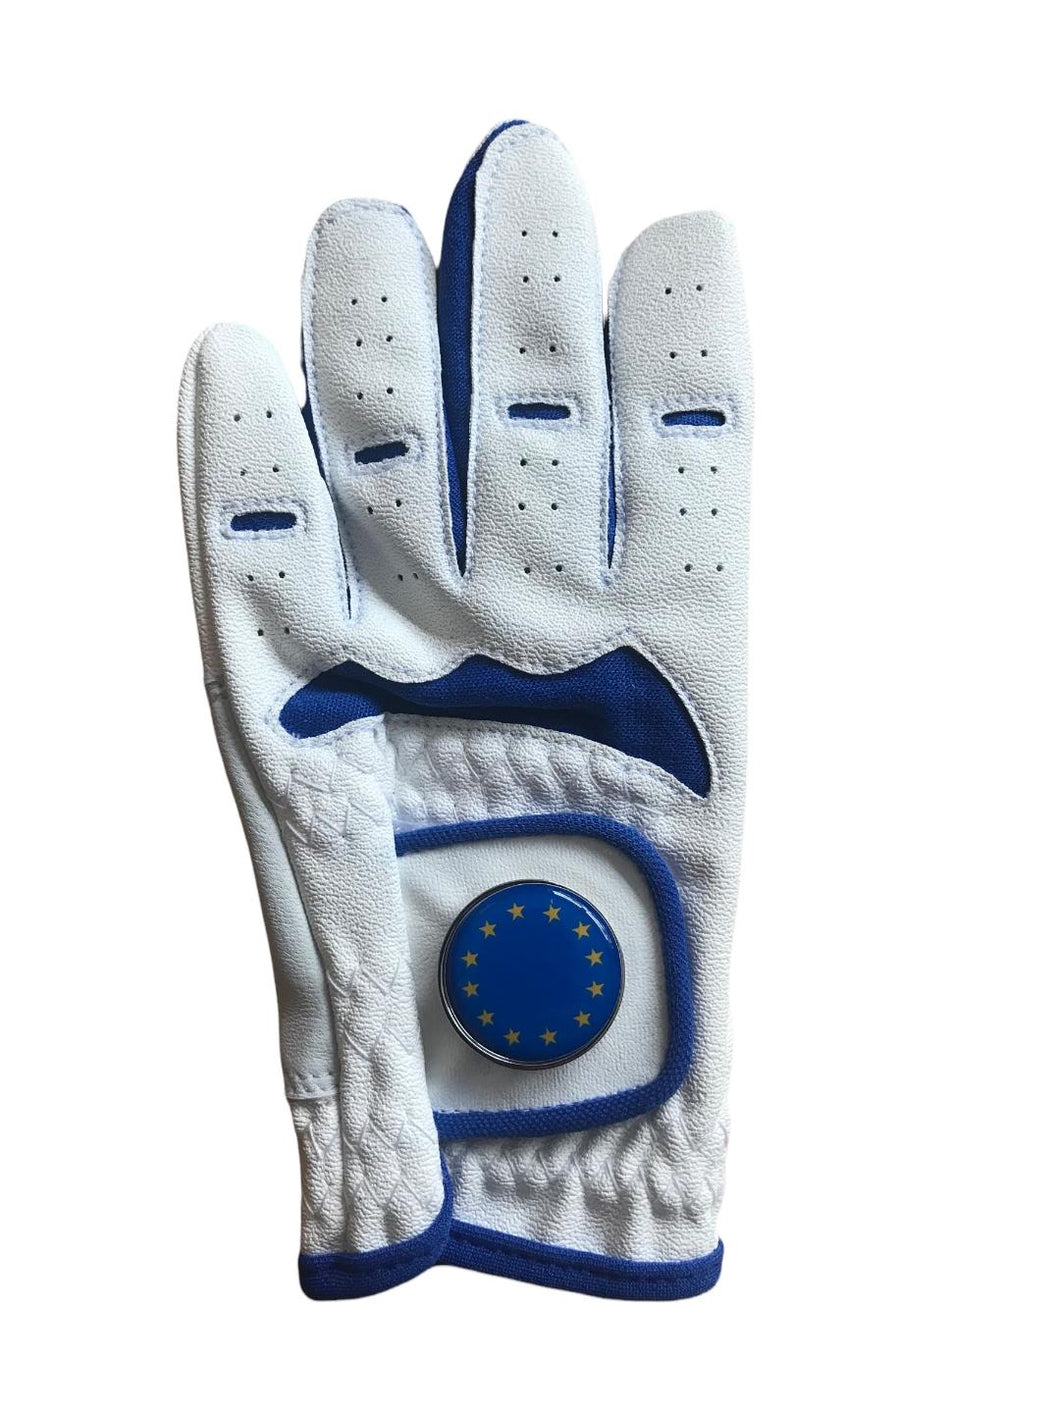 NEW Junior Blue / White All Weather Golf Glove. Europe Ball Marker. Small, Medium or Large.